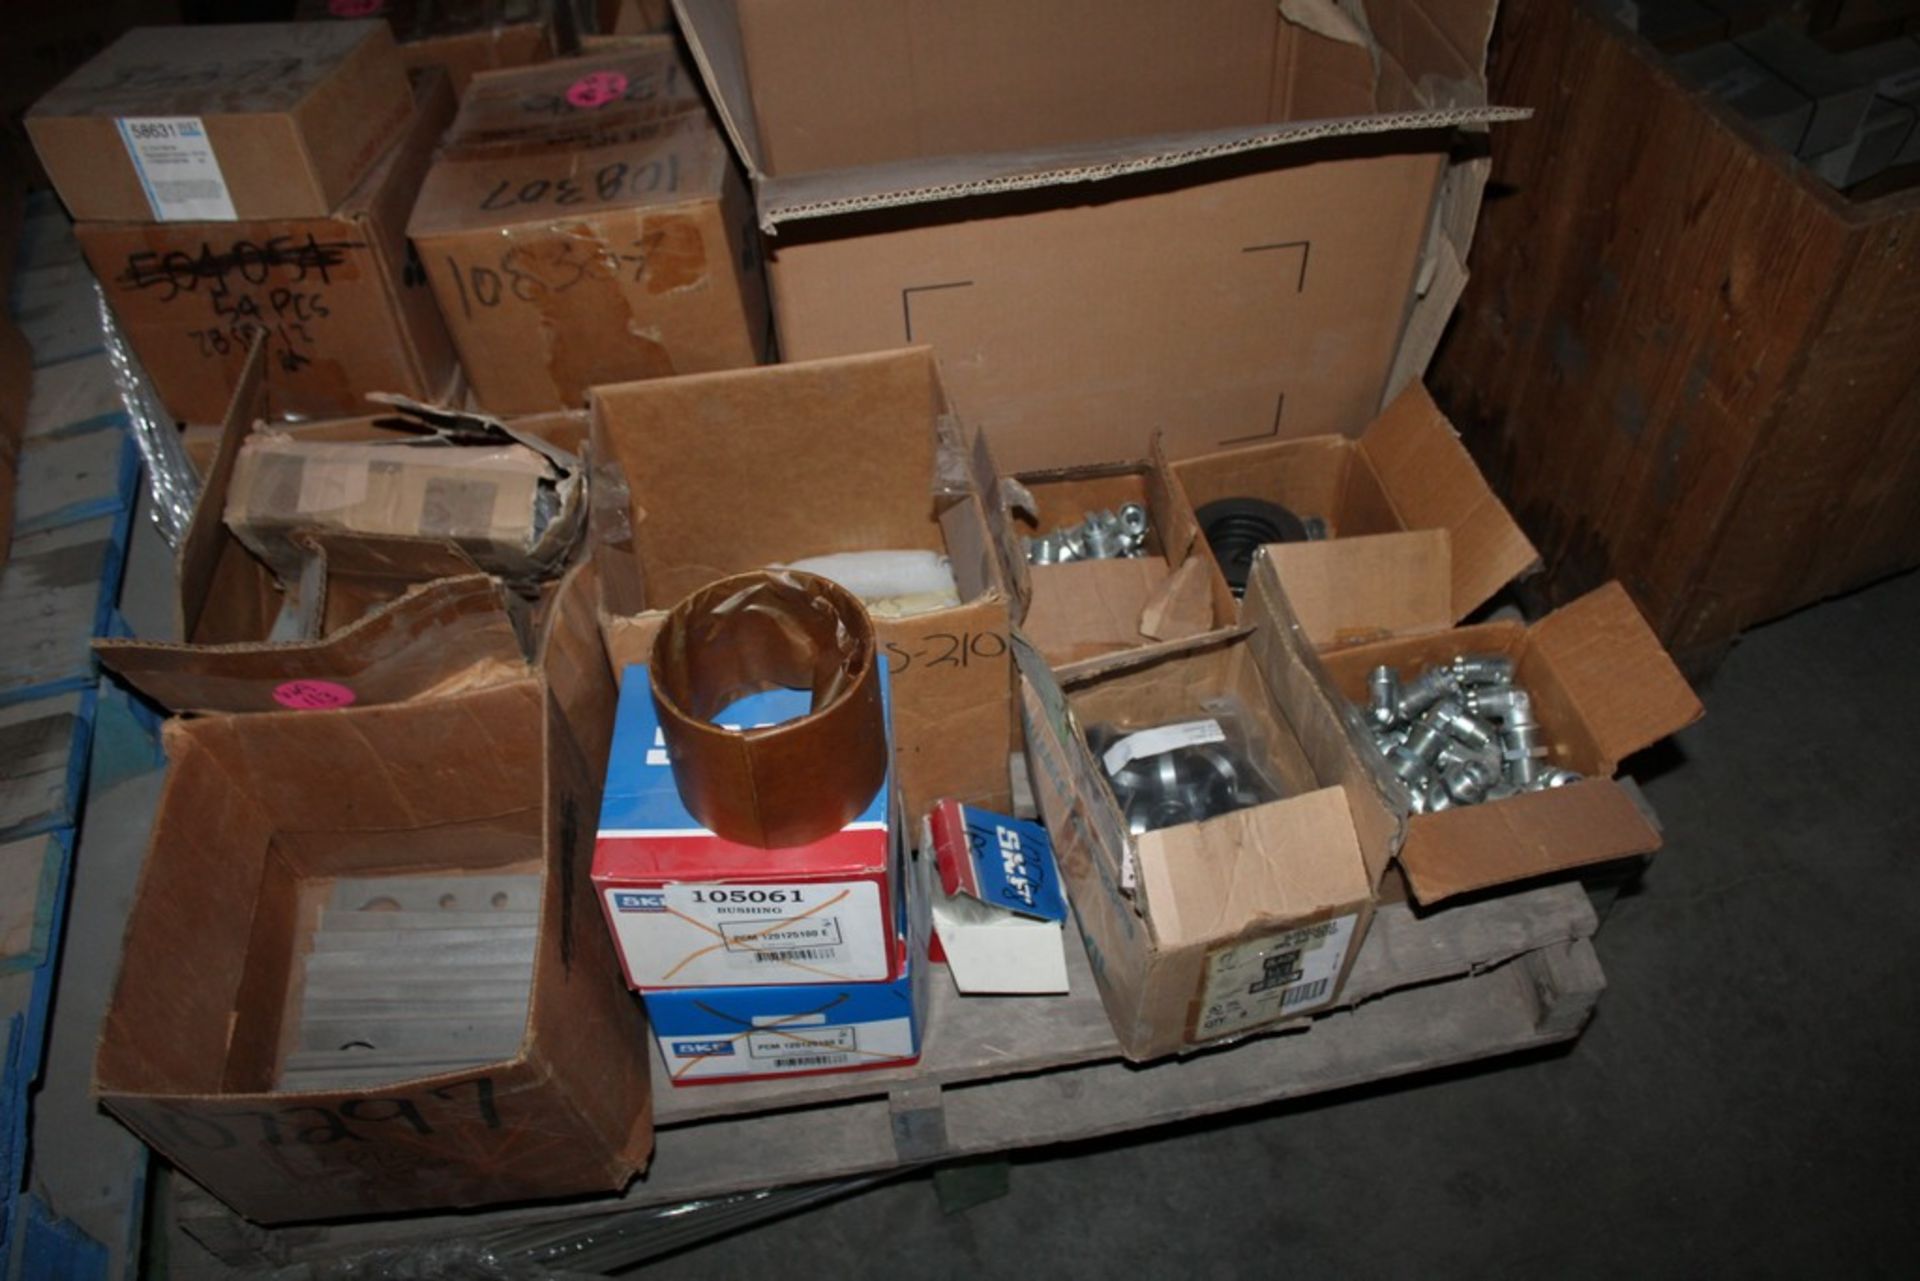 LARGE QUANTITY OF BOLTS, HYDRAULIC FITTINGS, STEEL PLATES, ETC. - Image 3 of 3